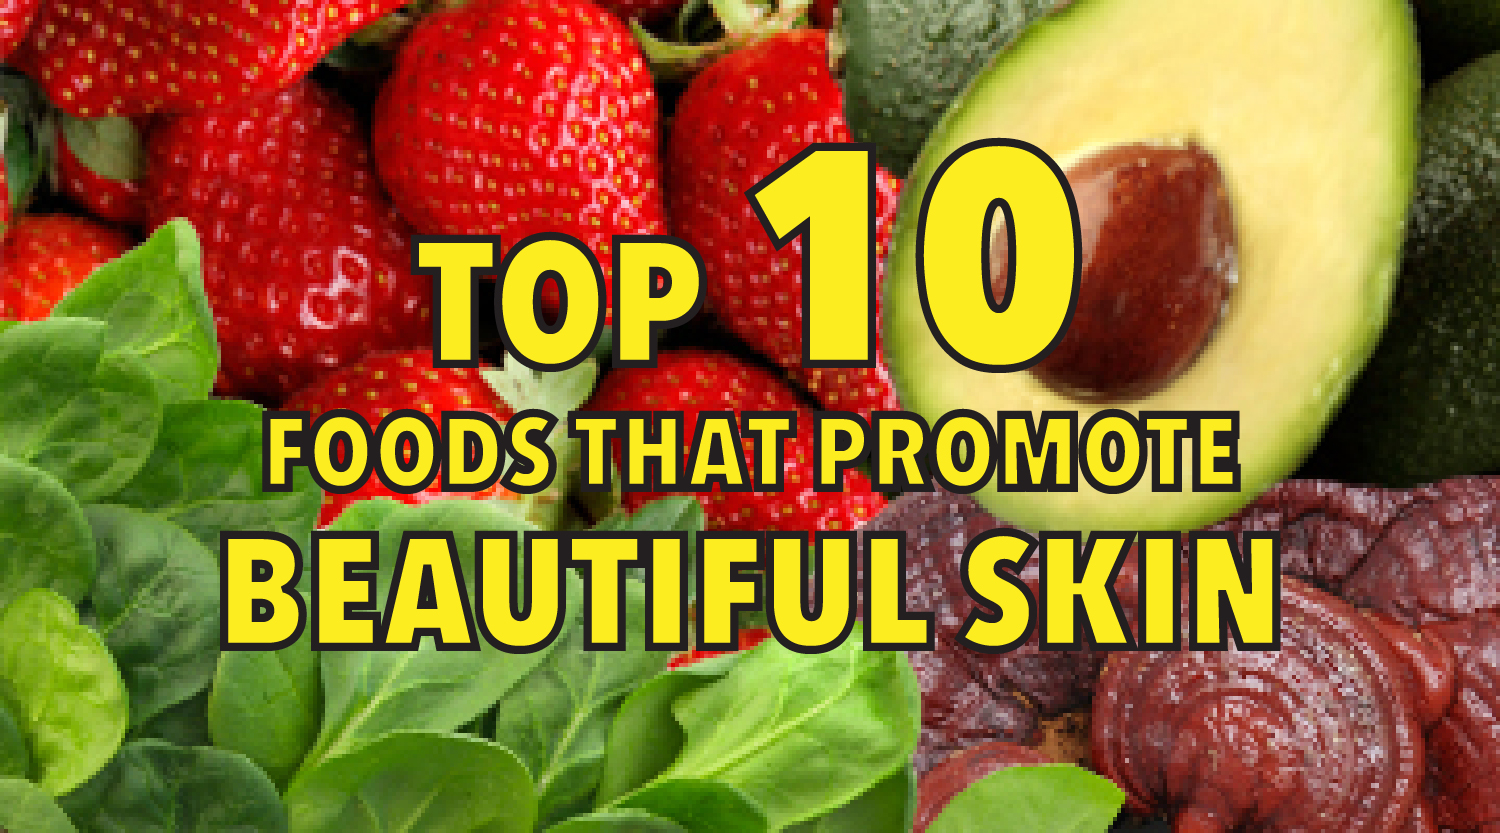 Top 10 Foods that Promote Beautiful Skin